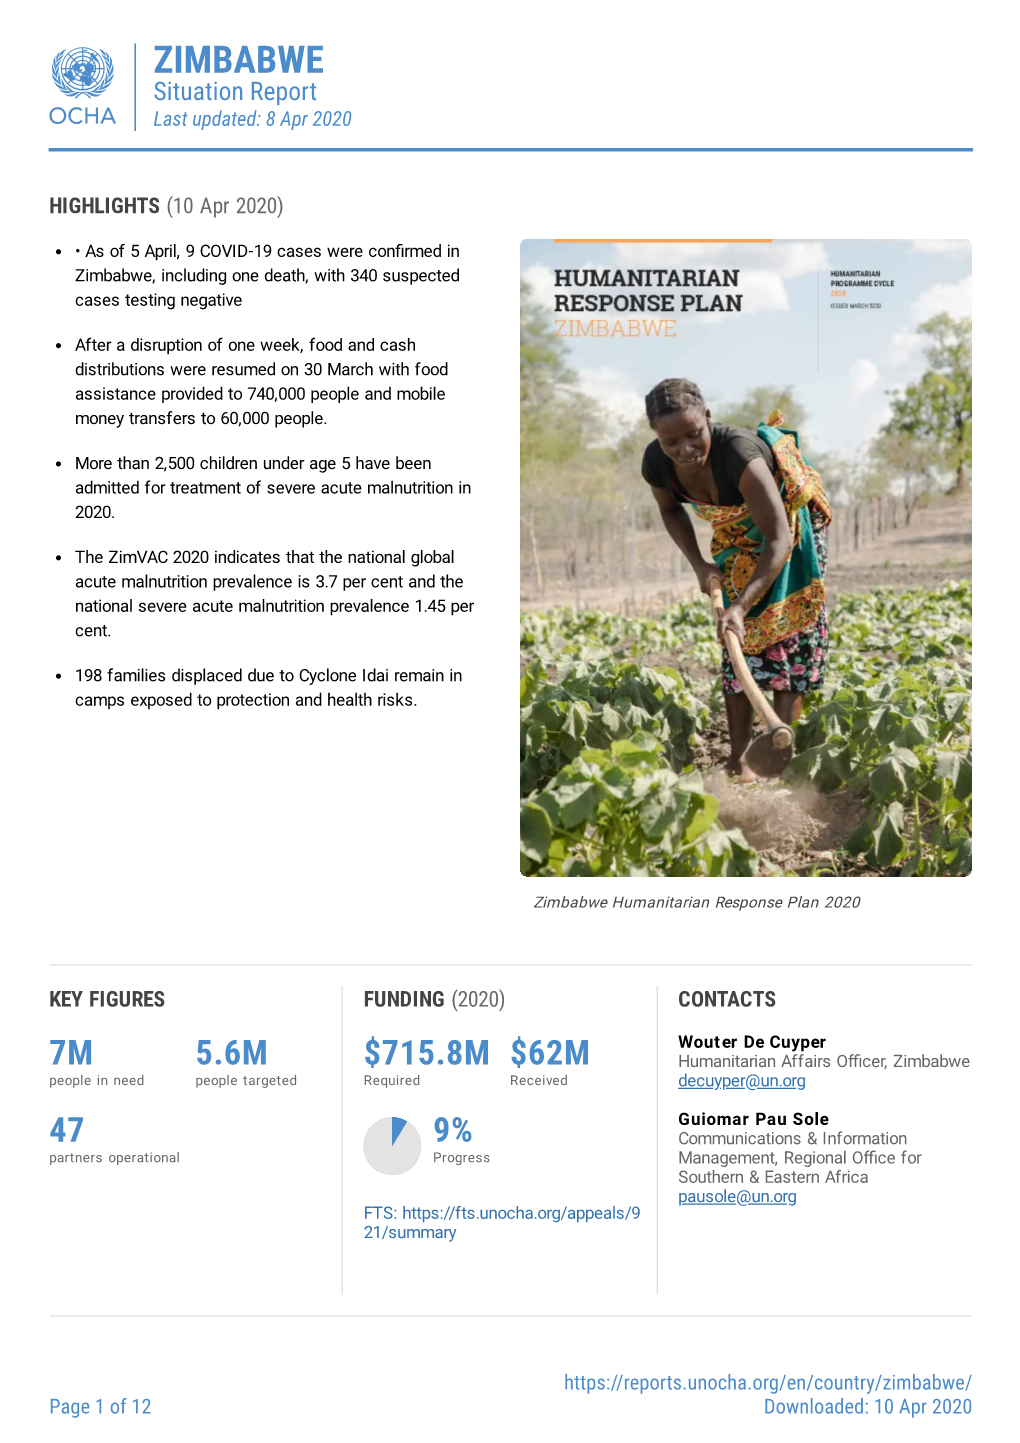 ZIMBABWE Situation Report Last Updated: 8 Apr 2020